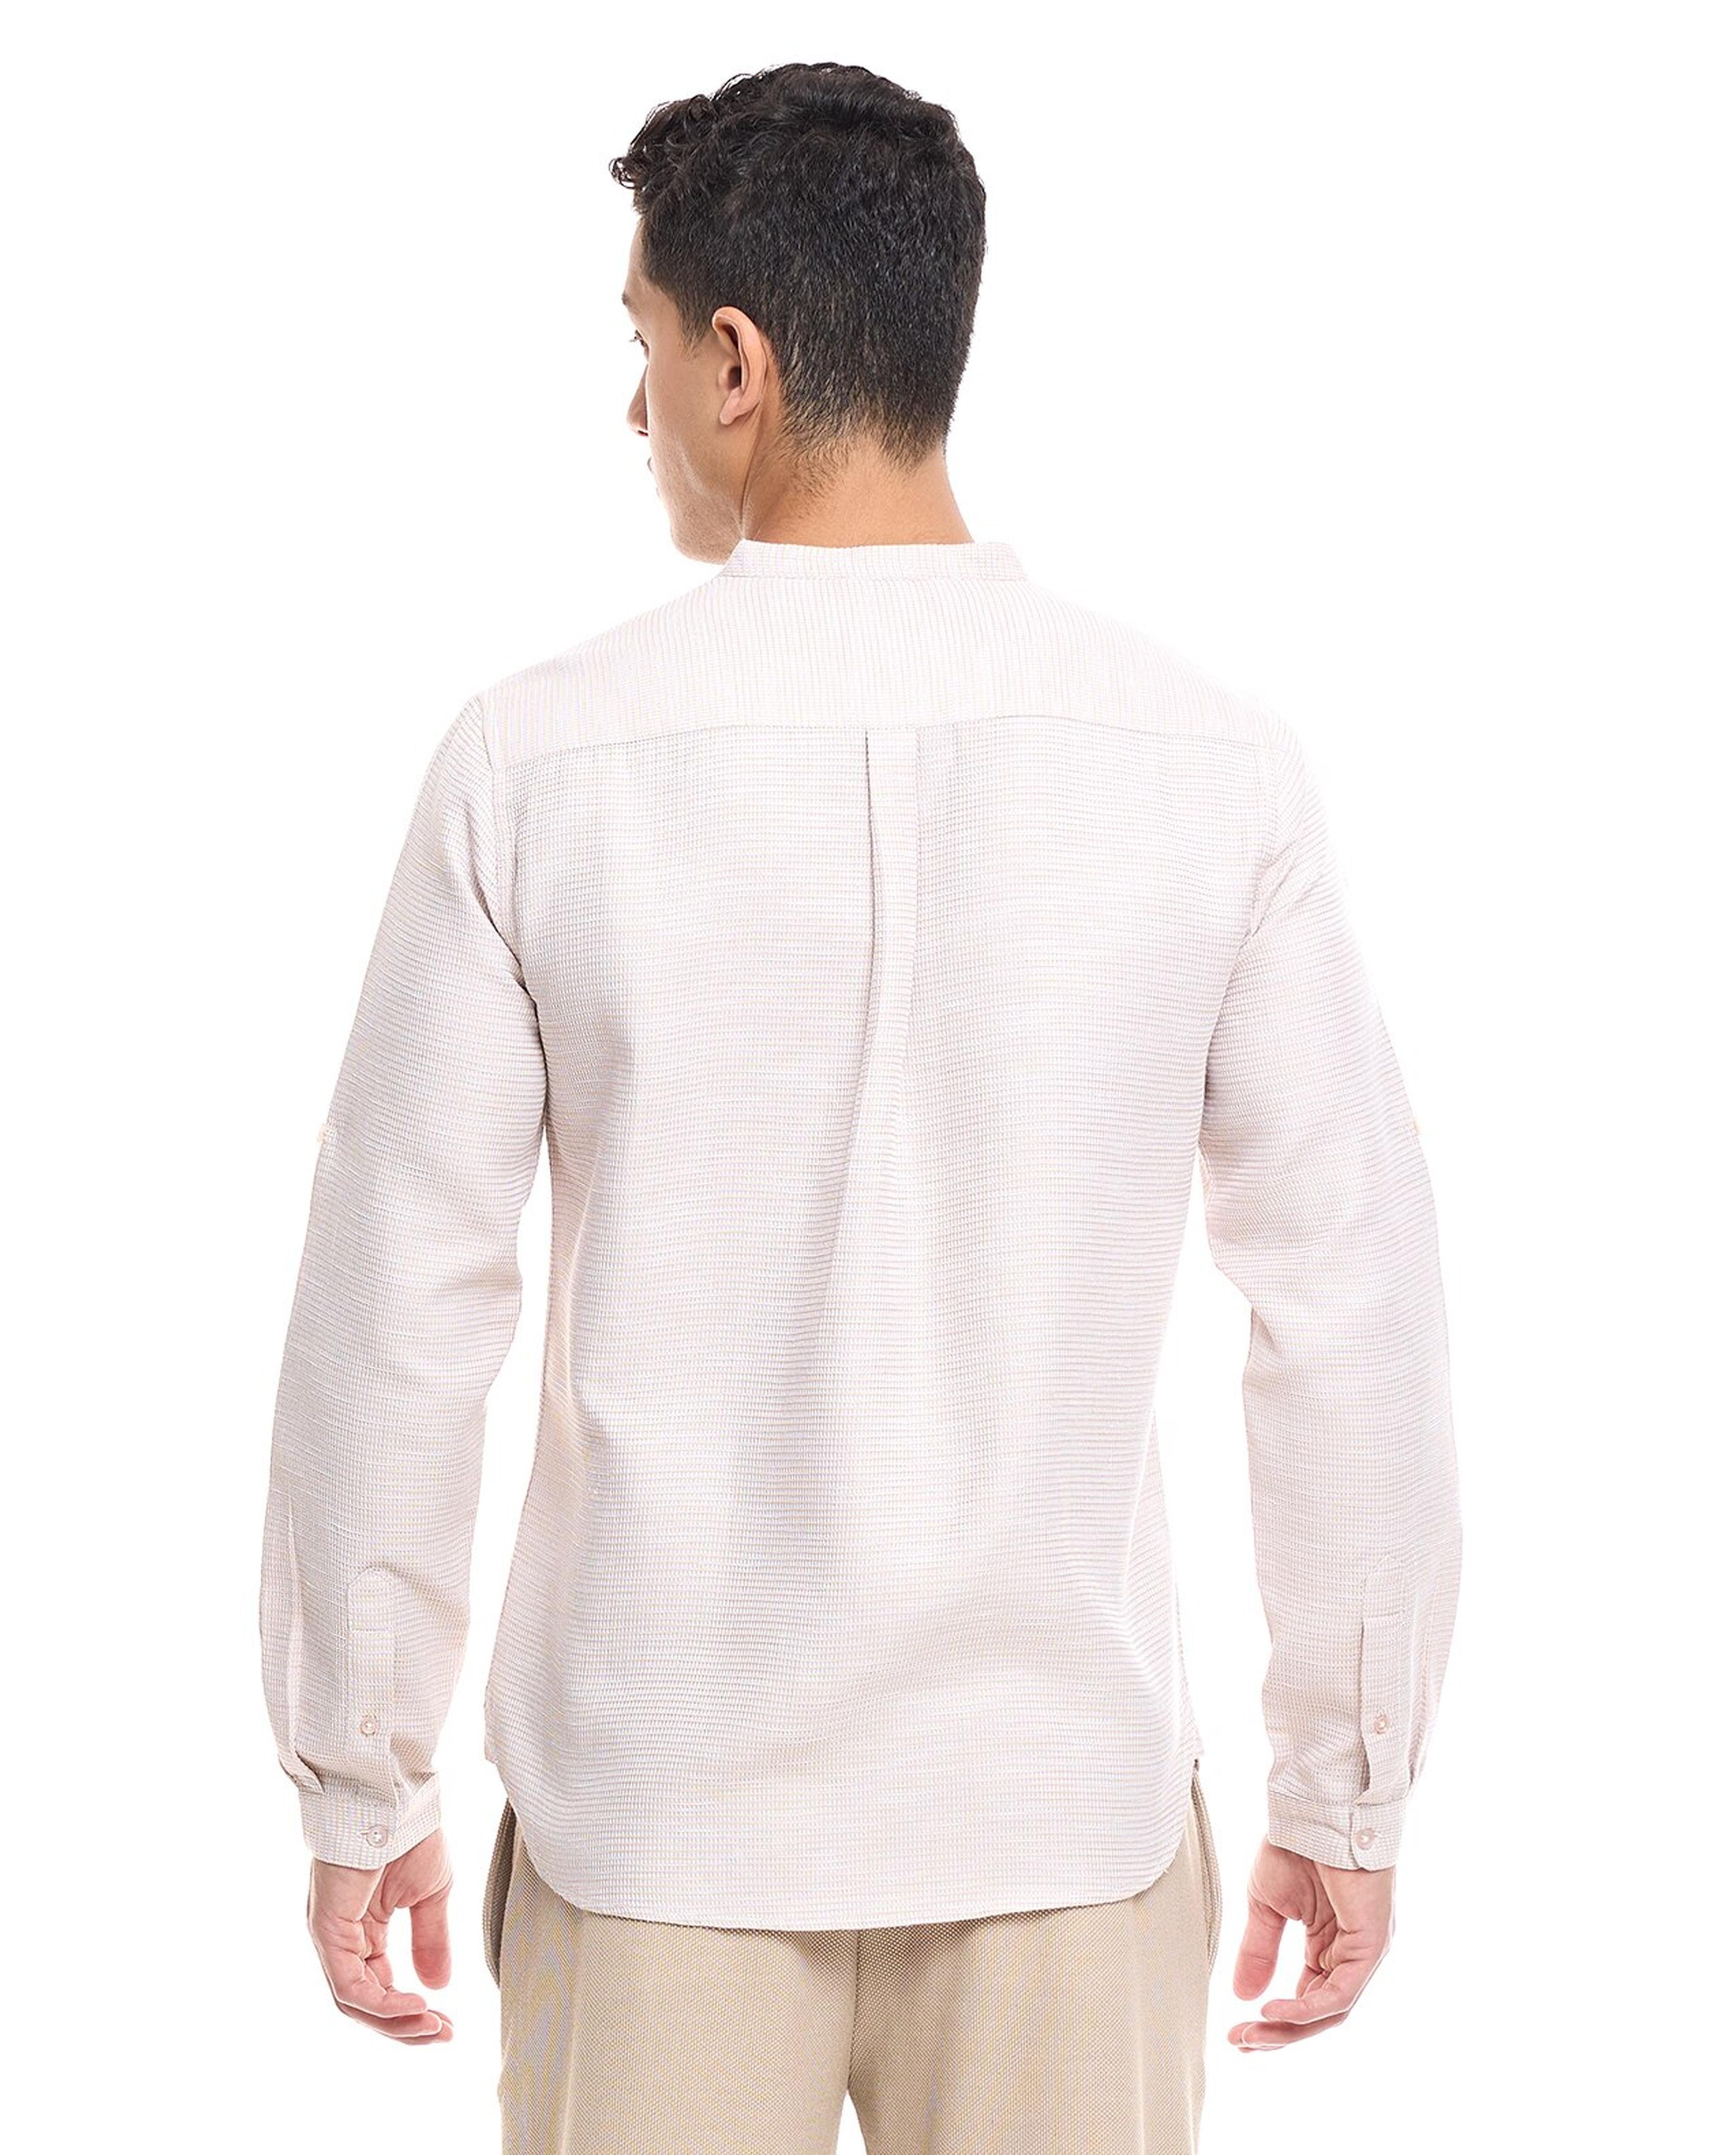 Textured Shirt with Stand Collar and Long Sleeves